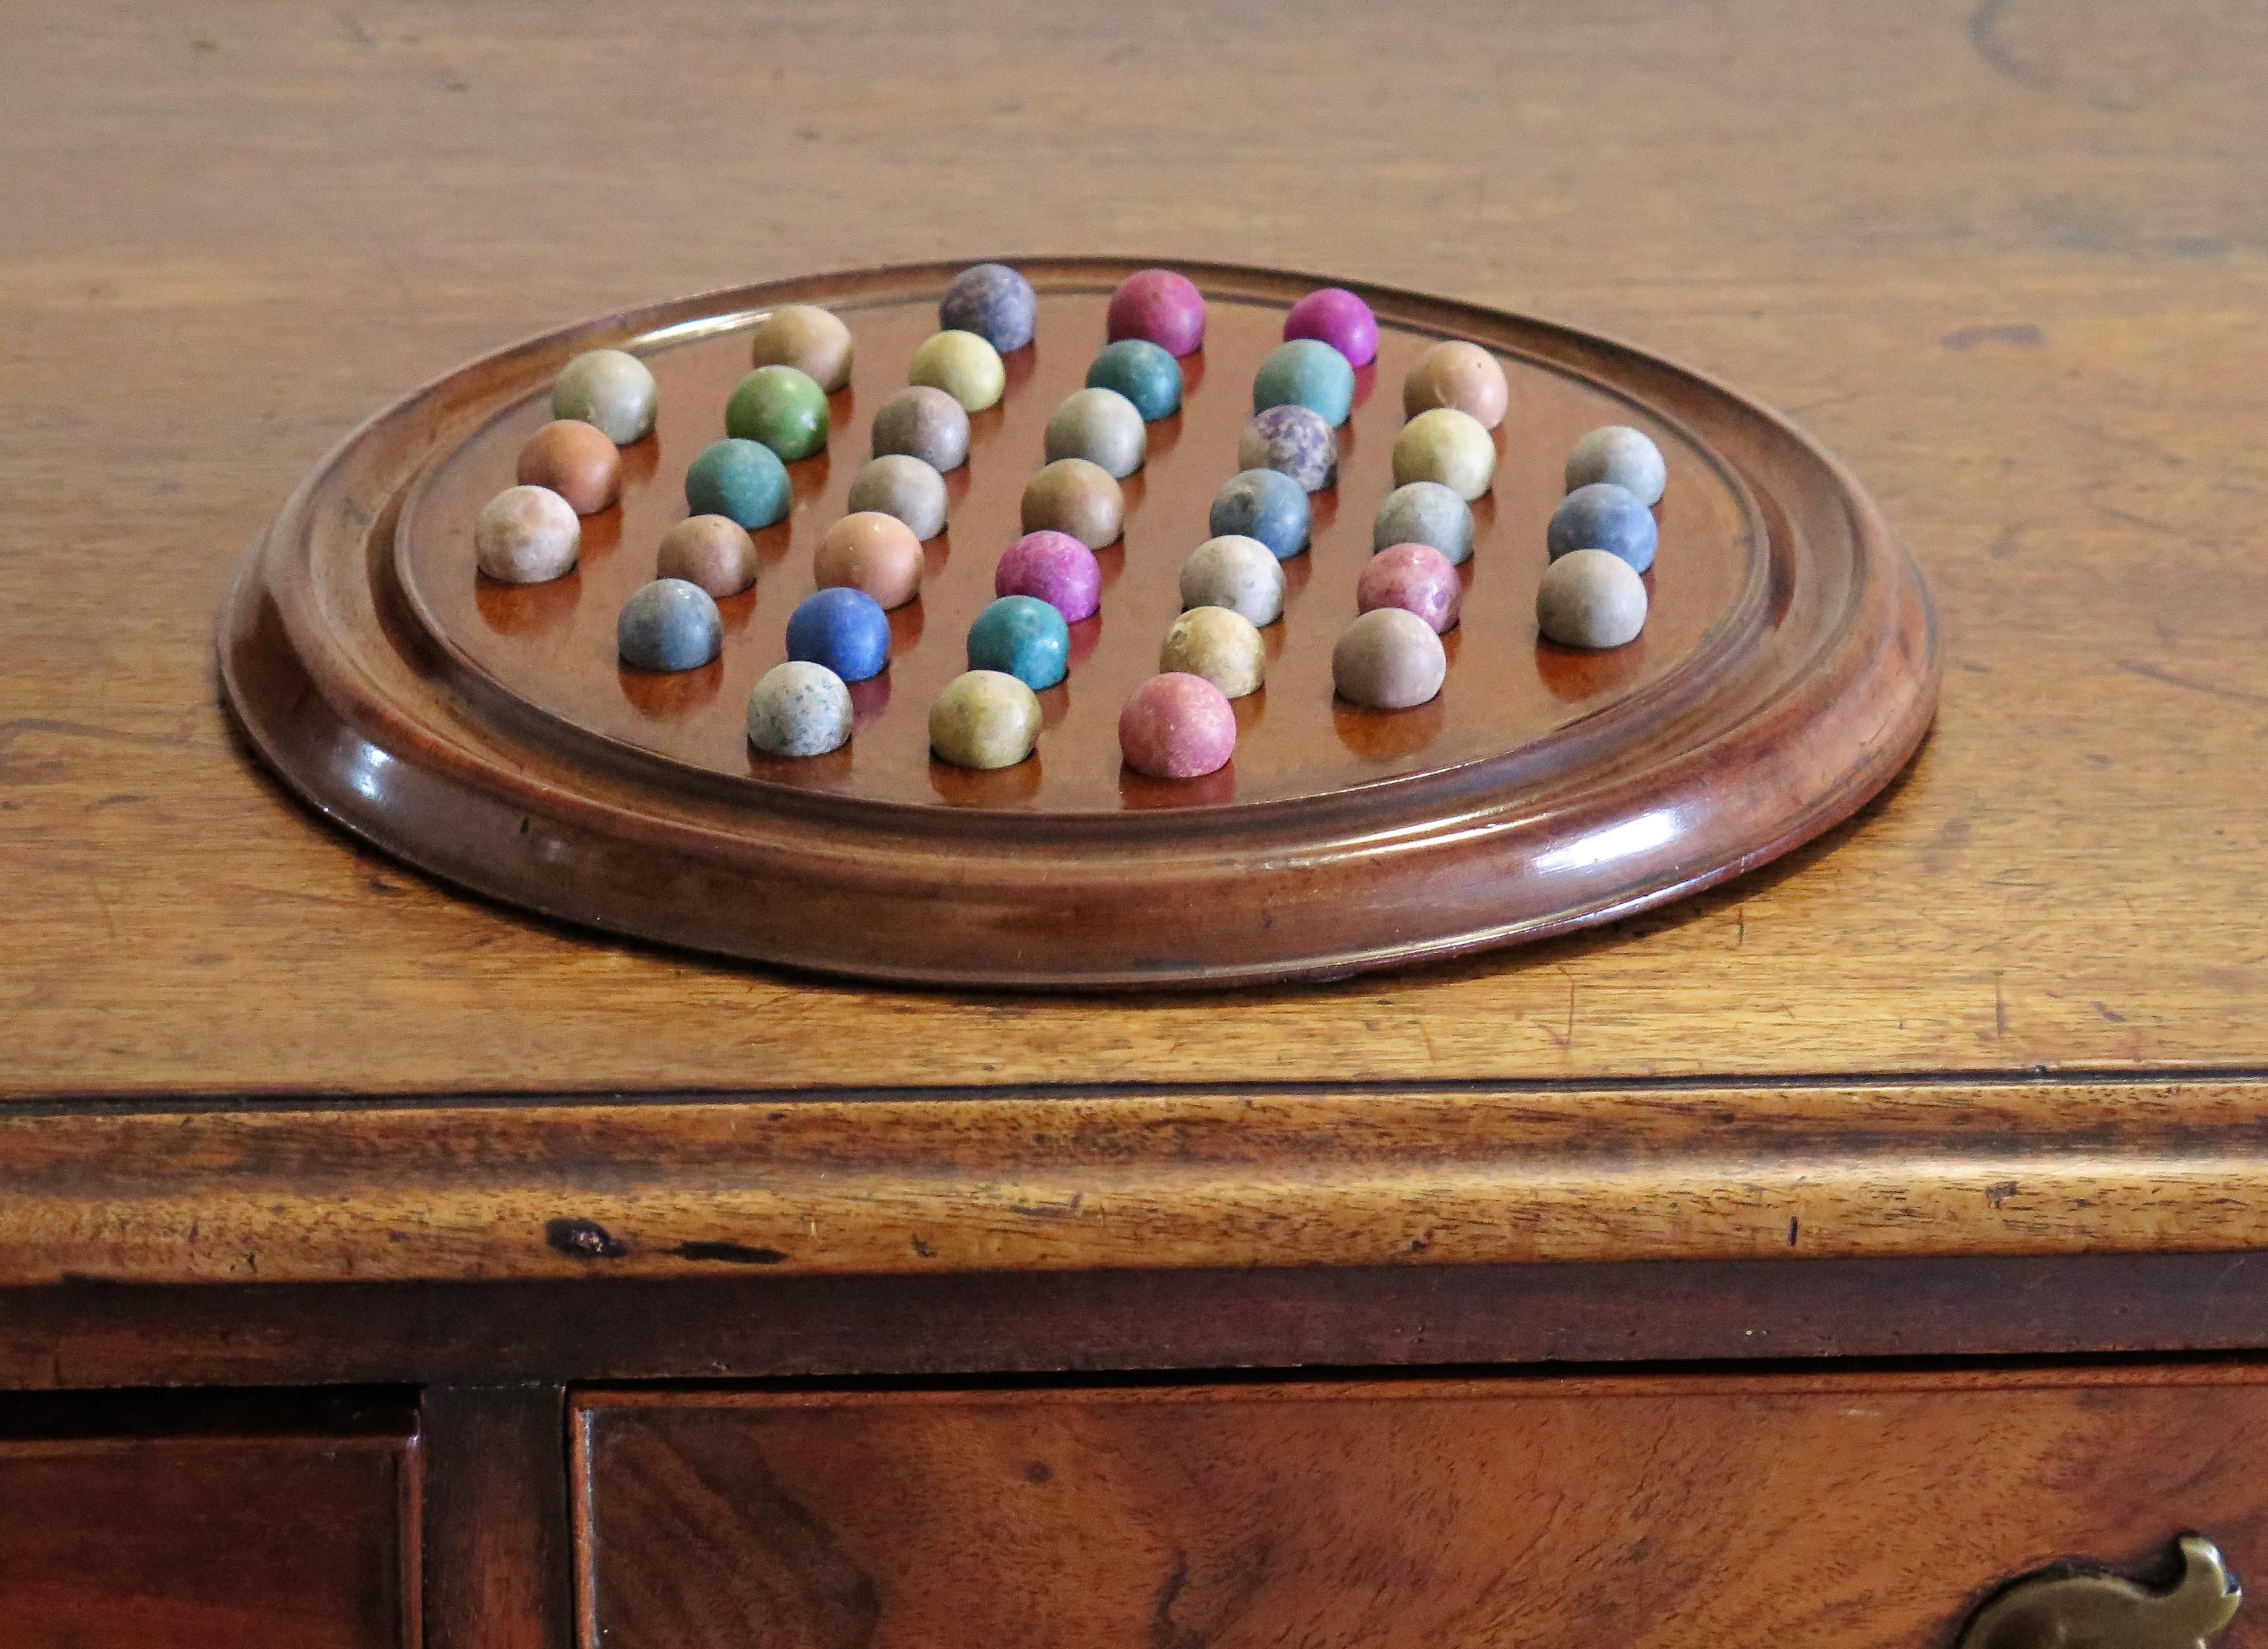 Marble Solitaire Game Mahogany Board 37 Handmade Clay /Stone Marbles 9